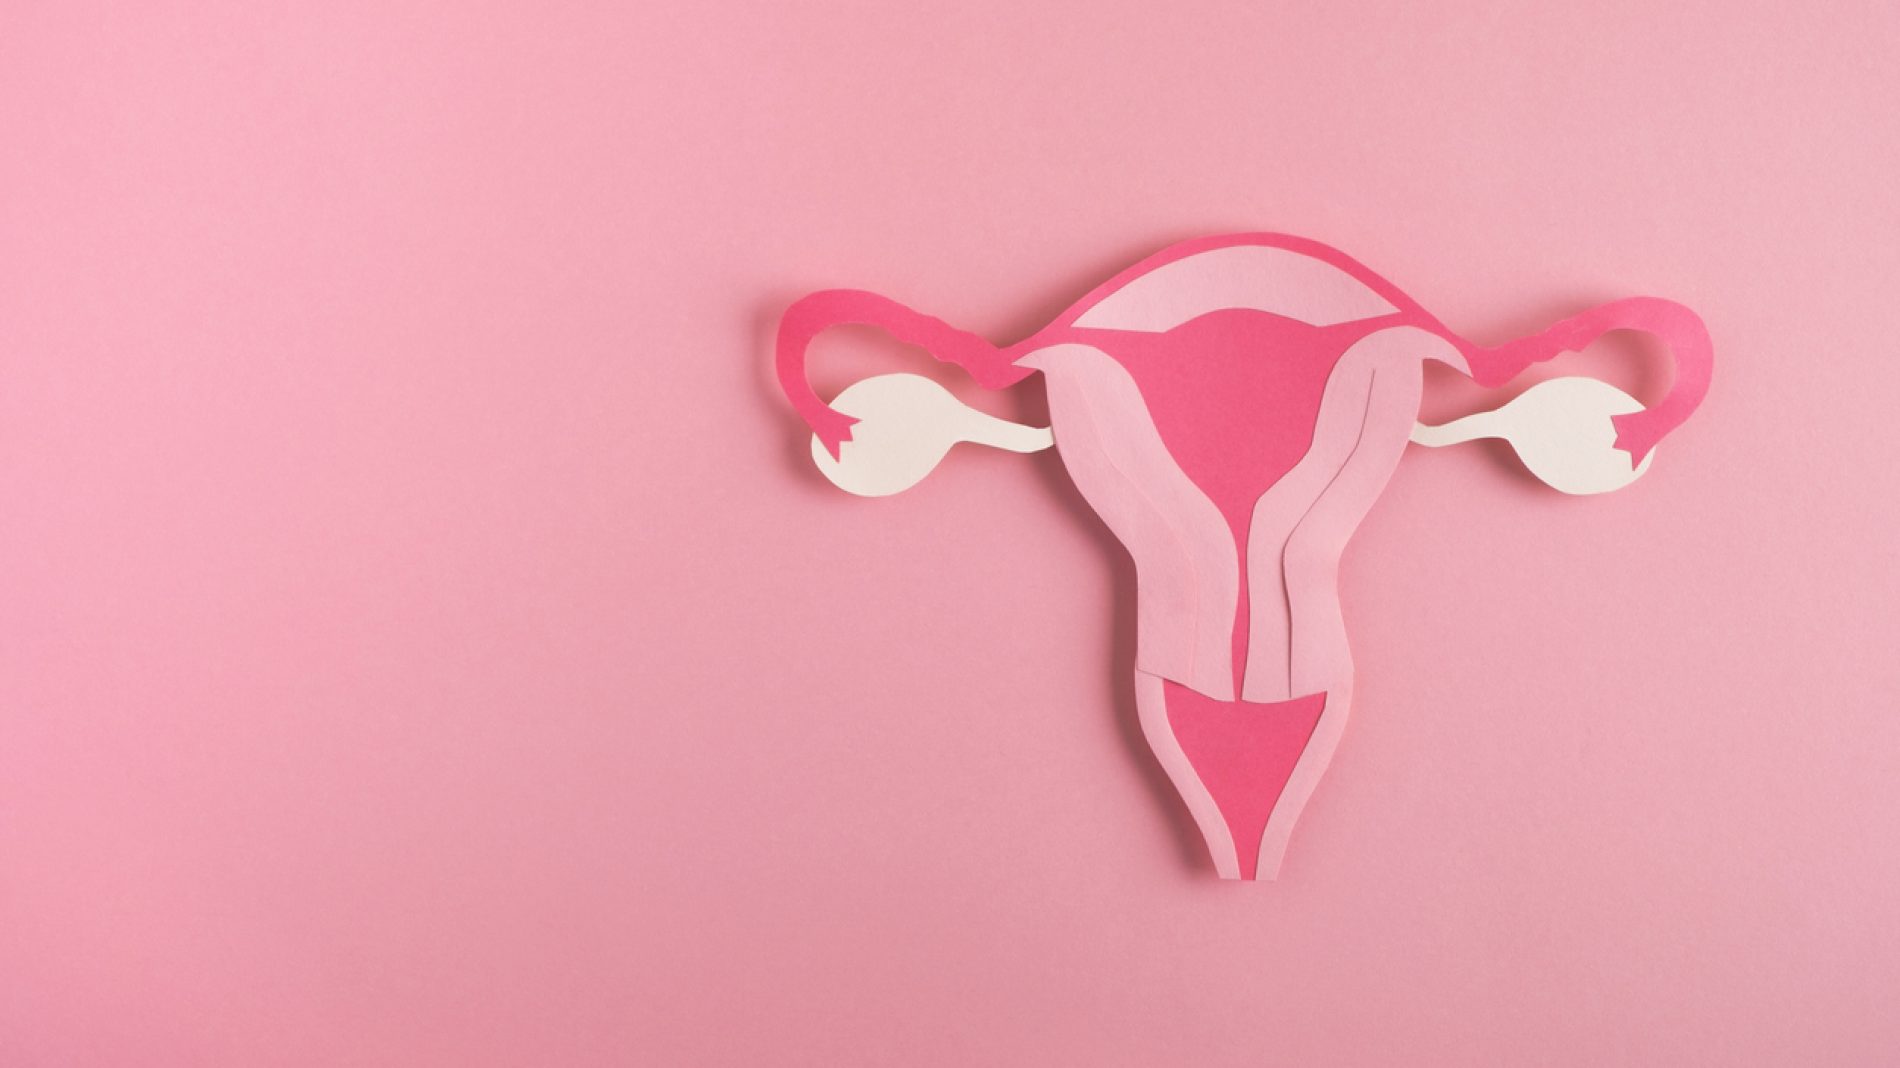 Decorative model uterus made frome paper on pink background. Top view, copy space